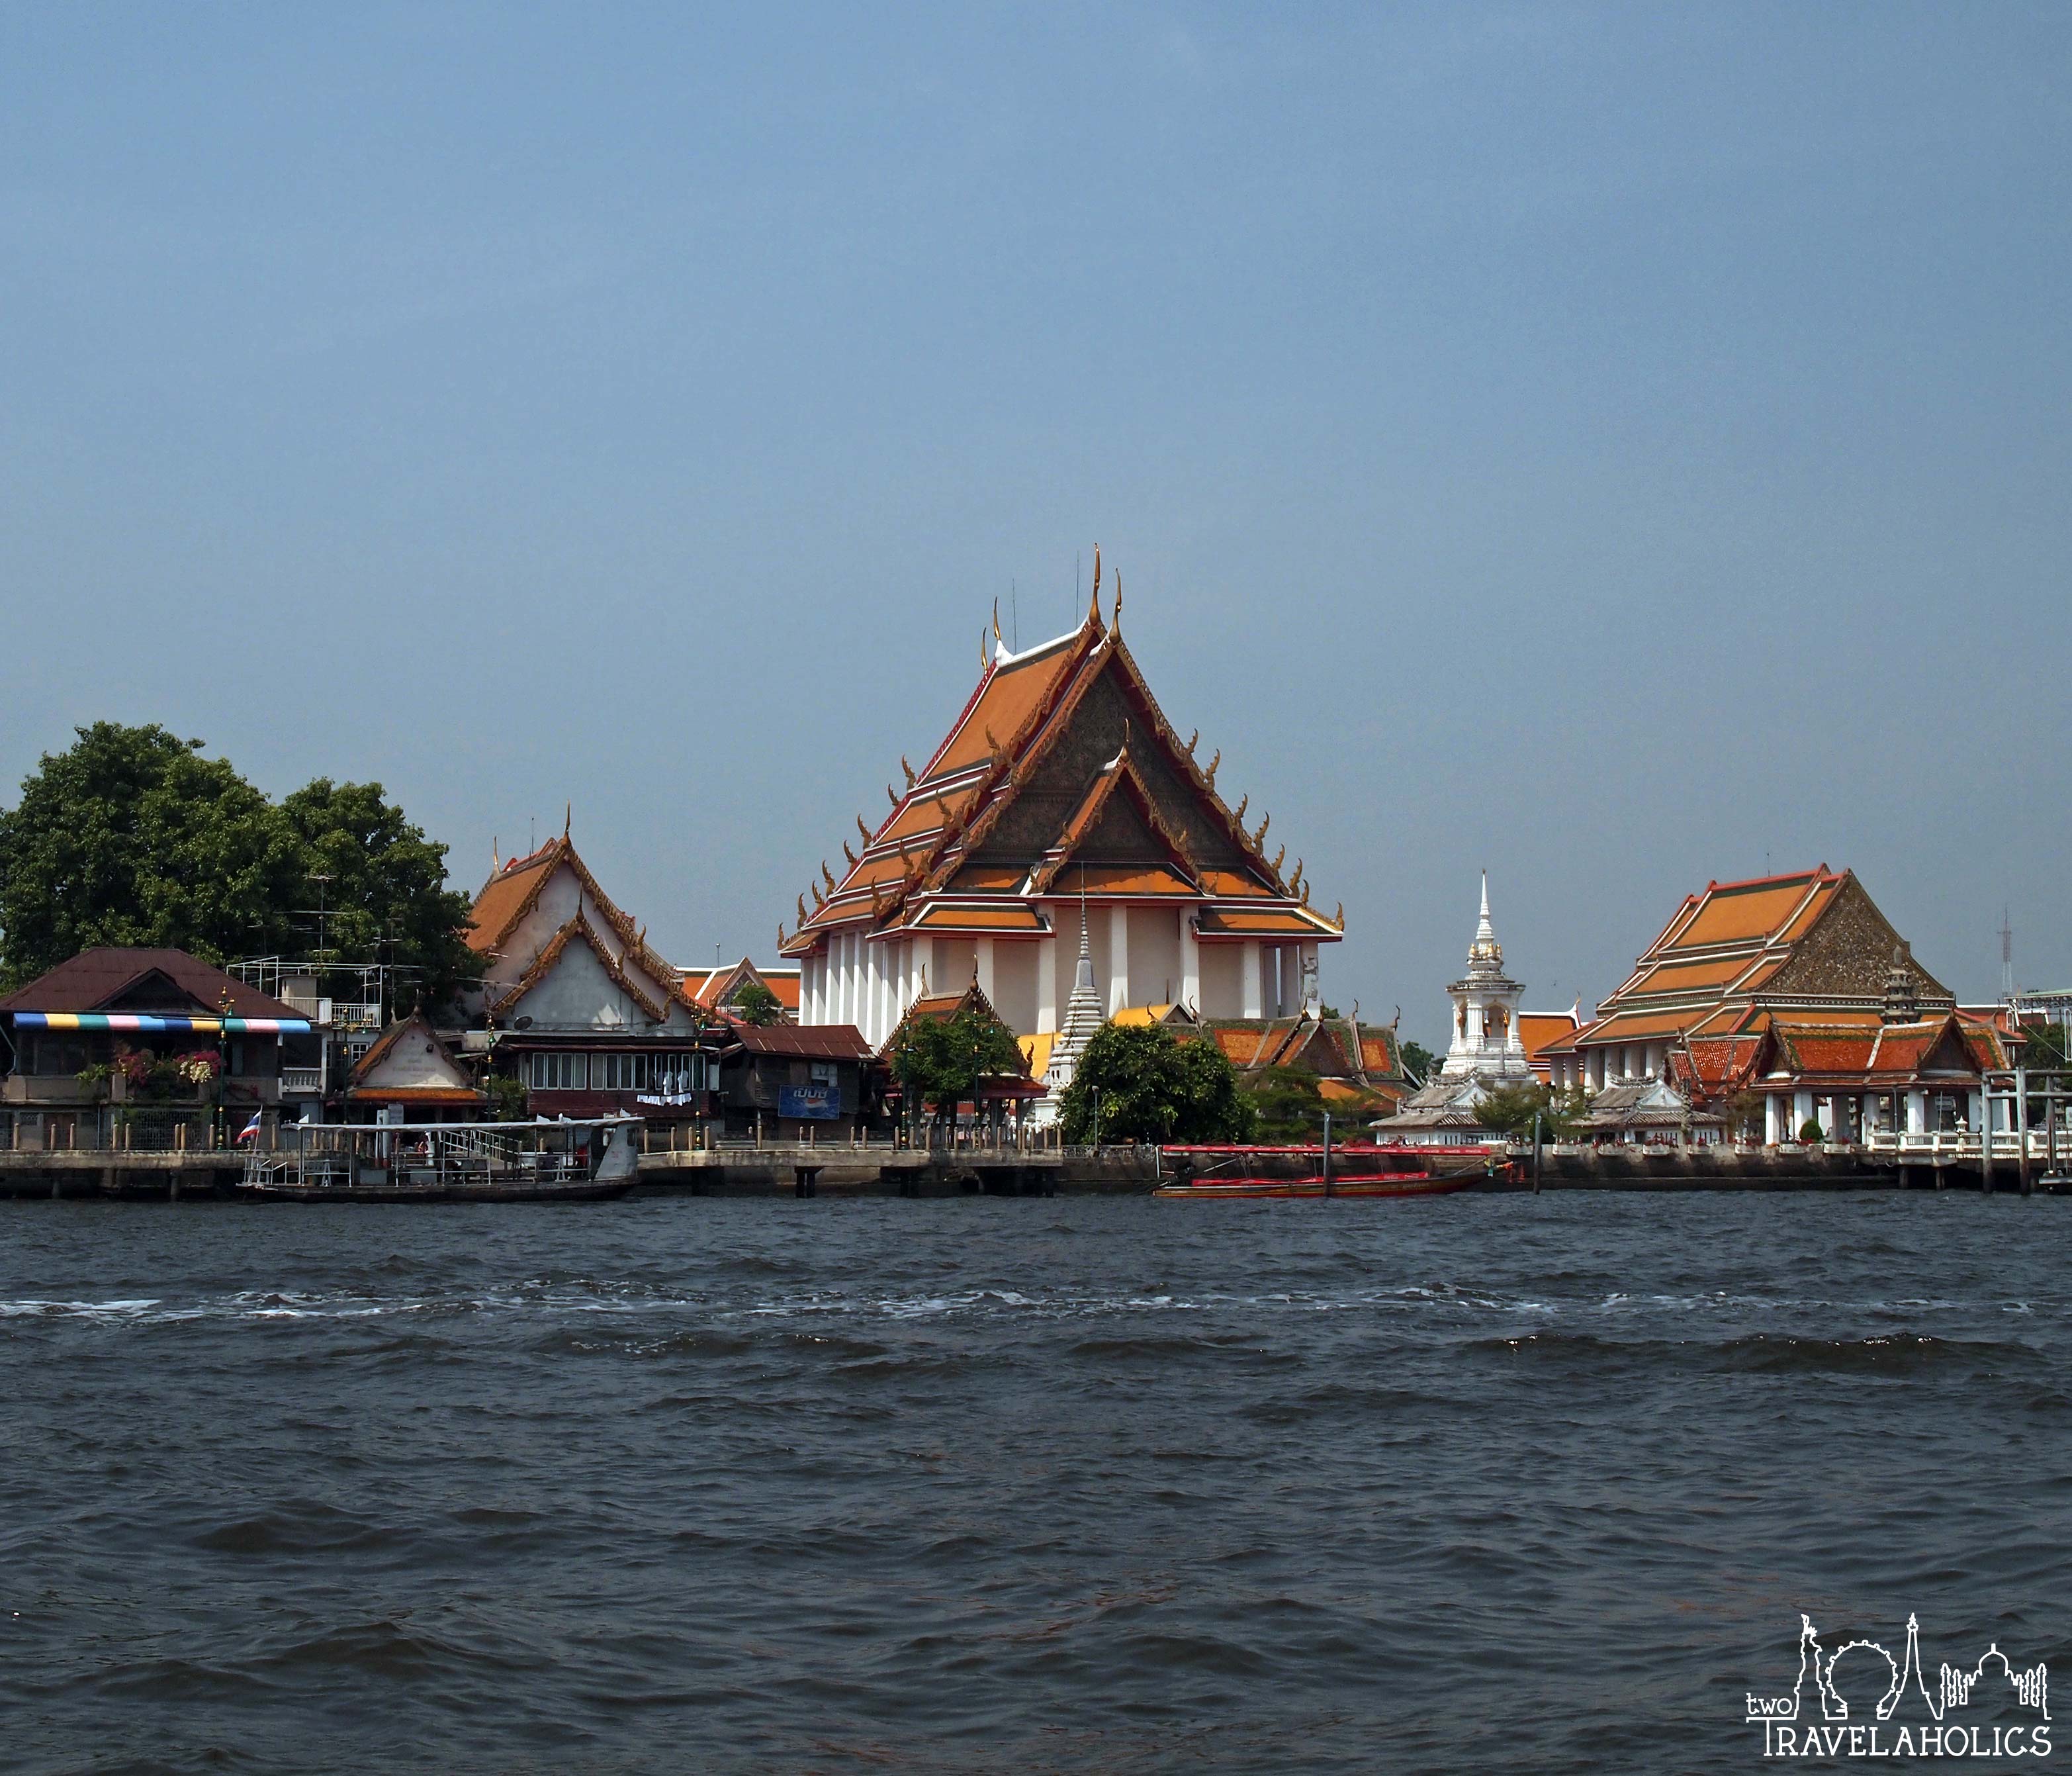 View from the Chao Phraya River